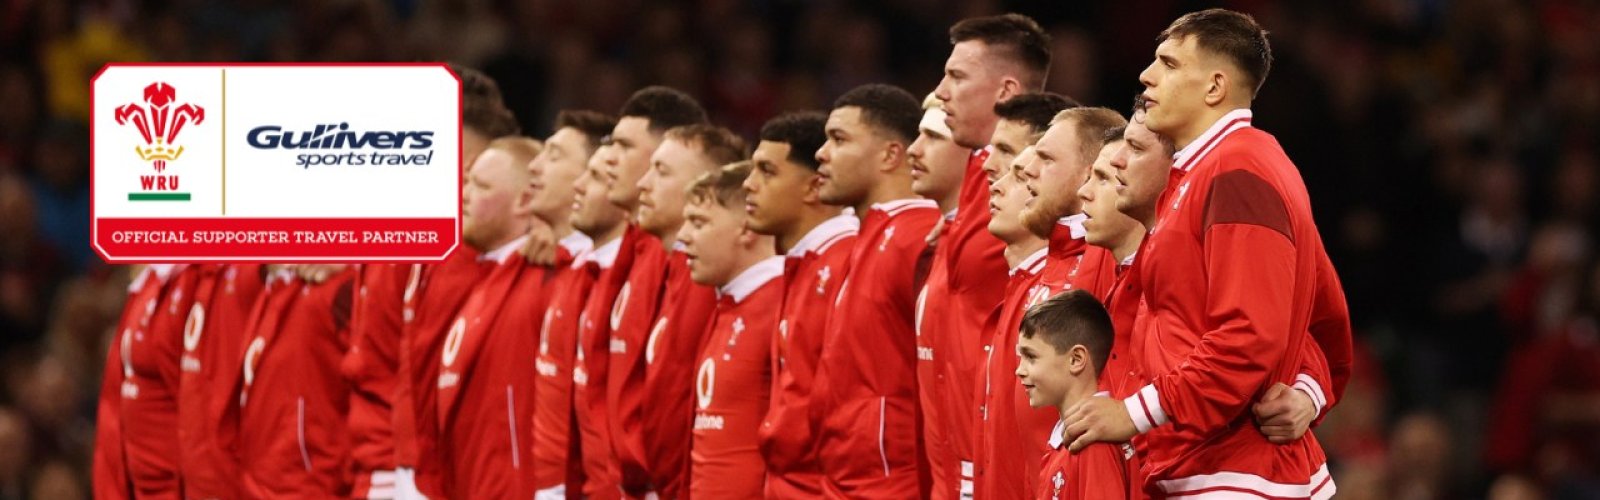 Wales Guinness Six Nations 2025 match ticket packages